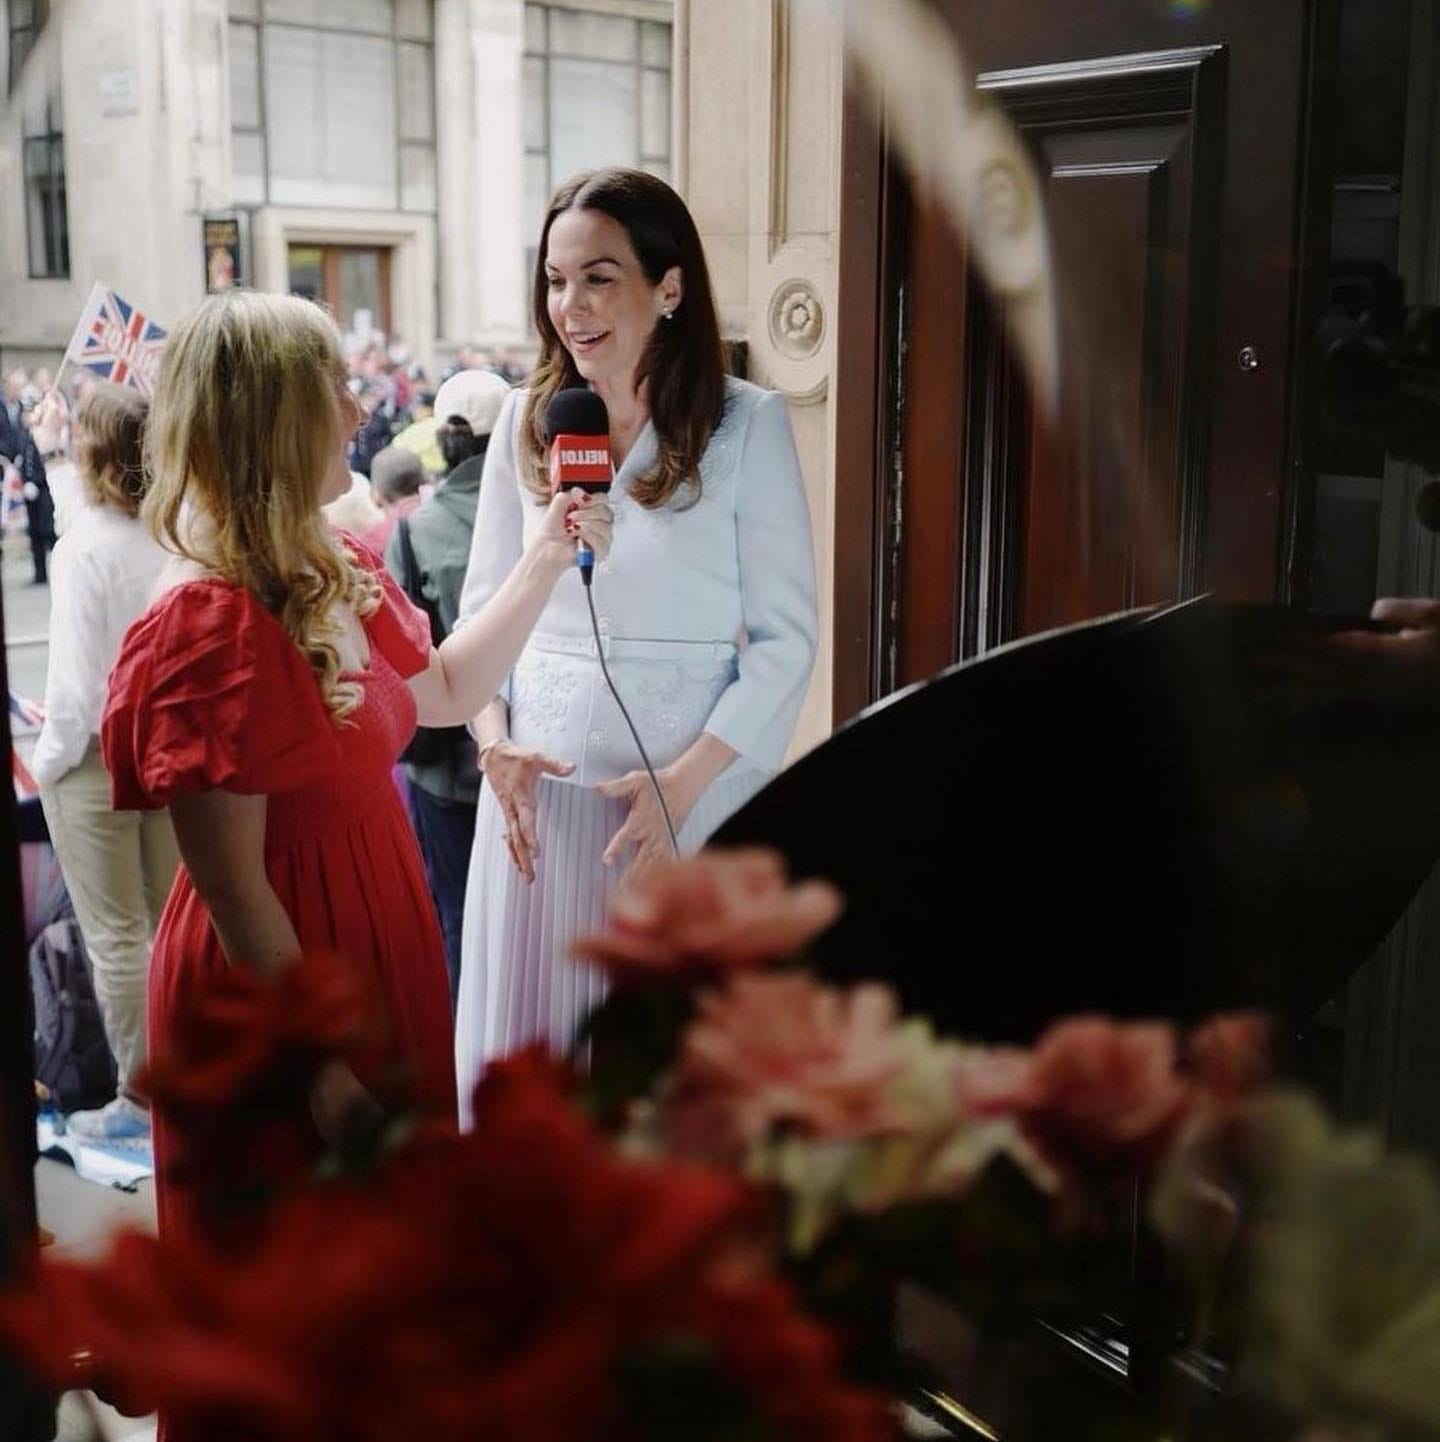 Isabelle Casey in a red dress interviewing Elizabeth Holmes at King Charles's coronation